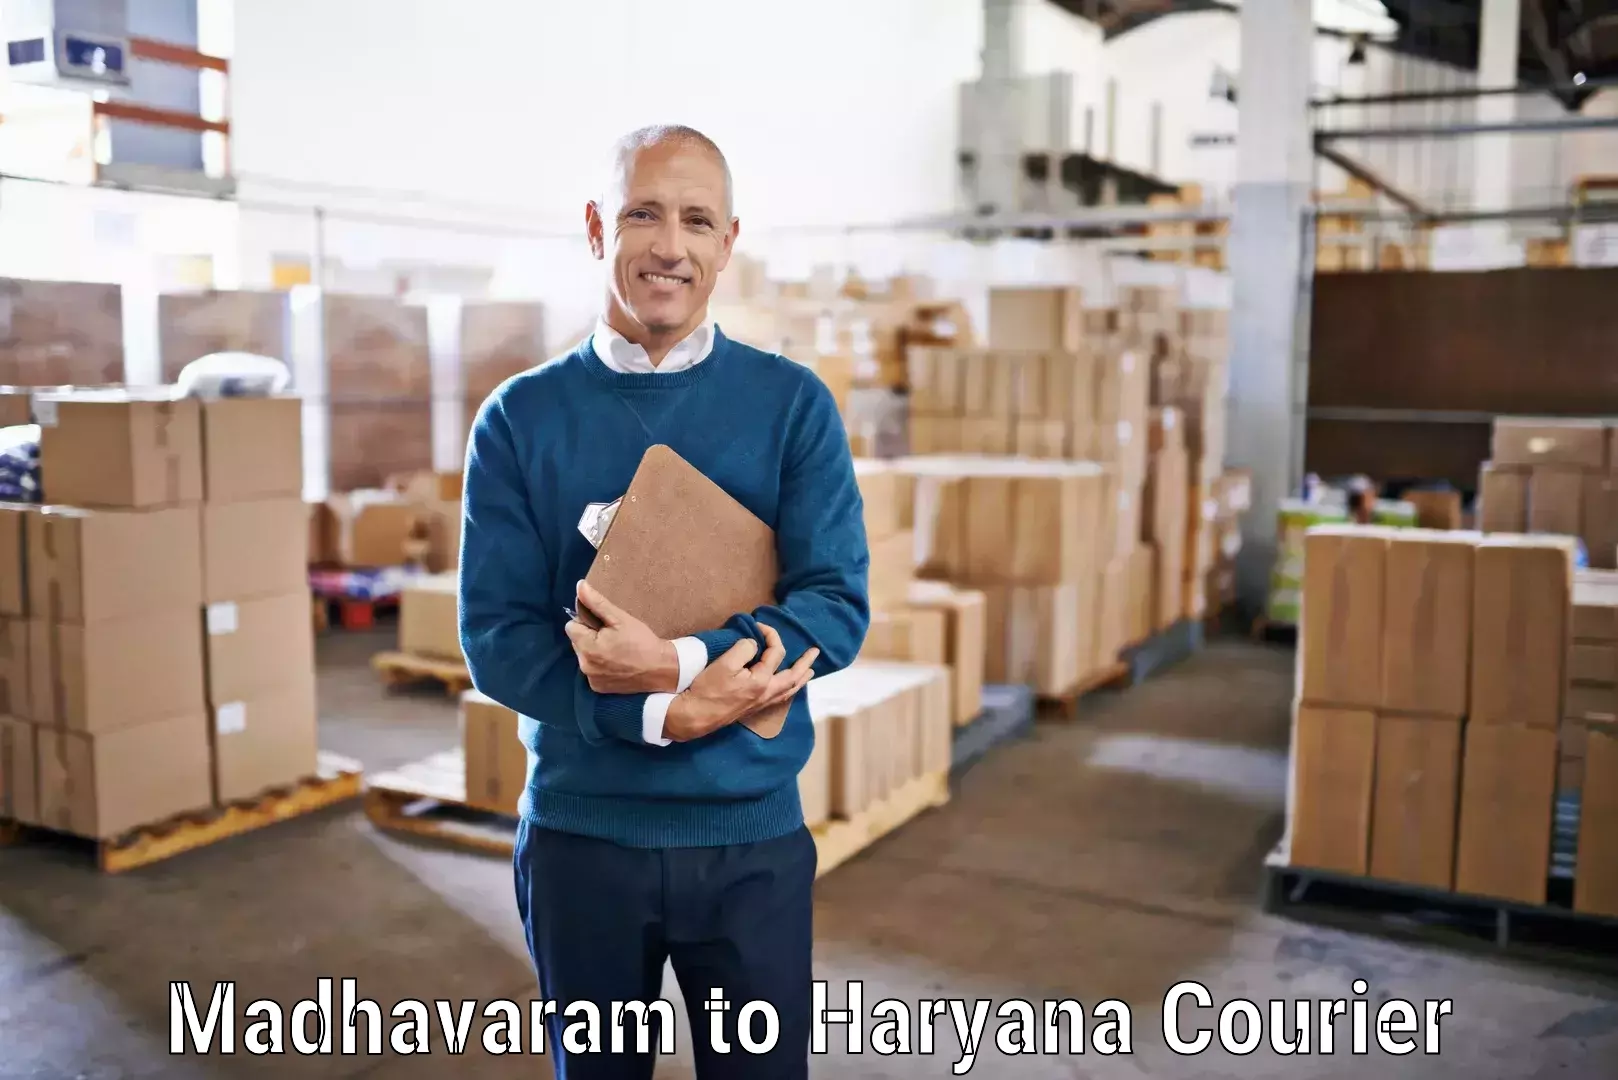 Express delivery solutions Madhavaram to NCR Haryana